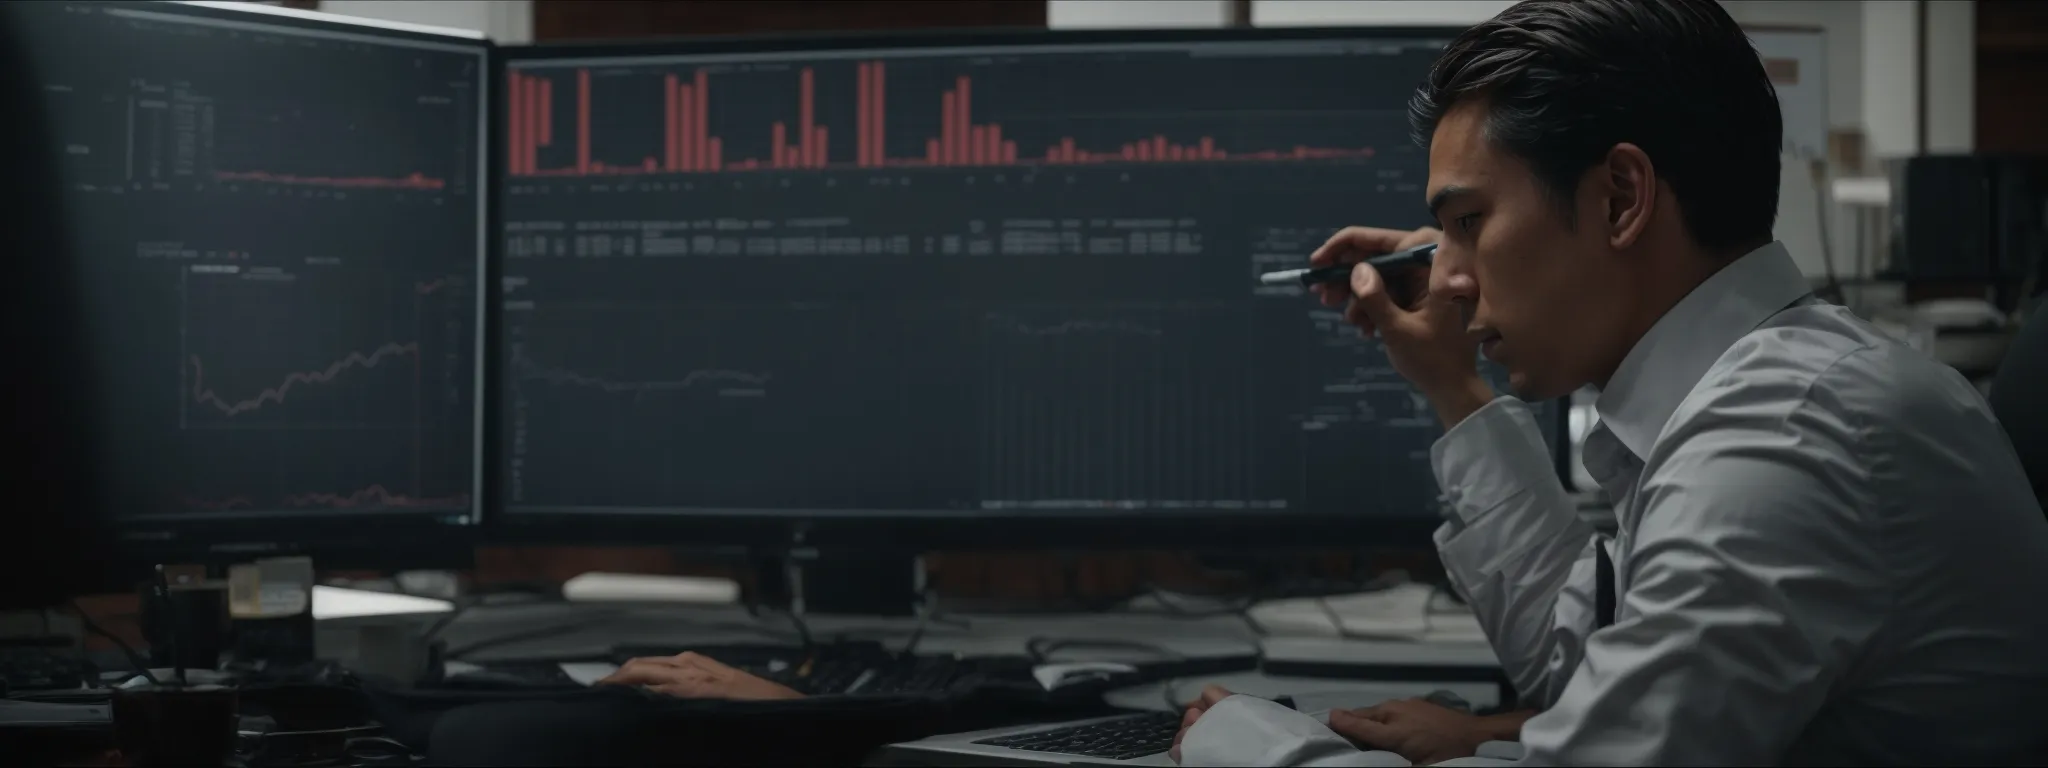 a marketer intently analyzes graphs and charts on a computer screen, strategizing over a digital advertising campaign.